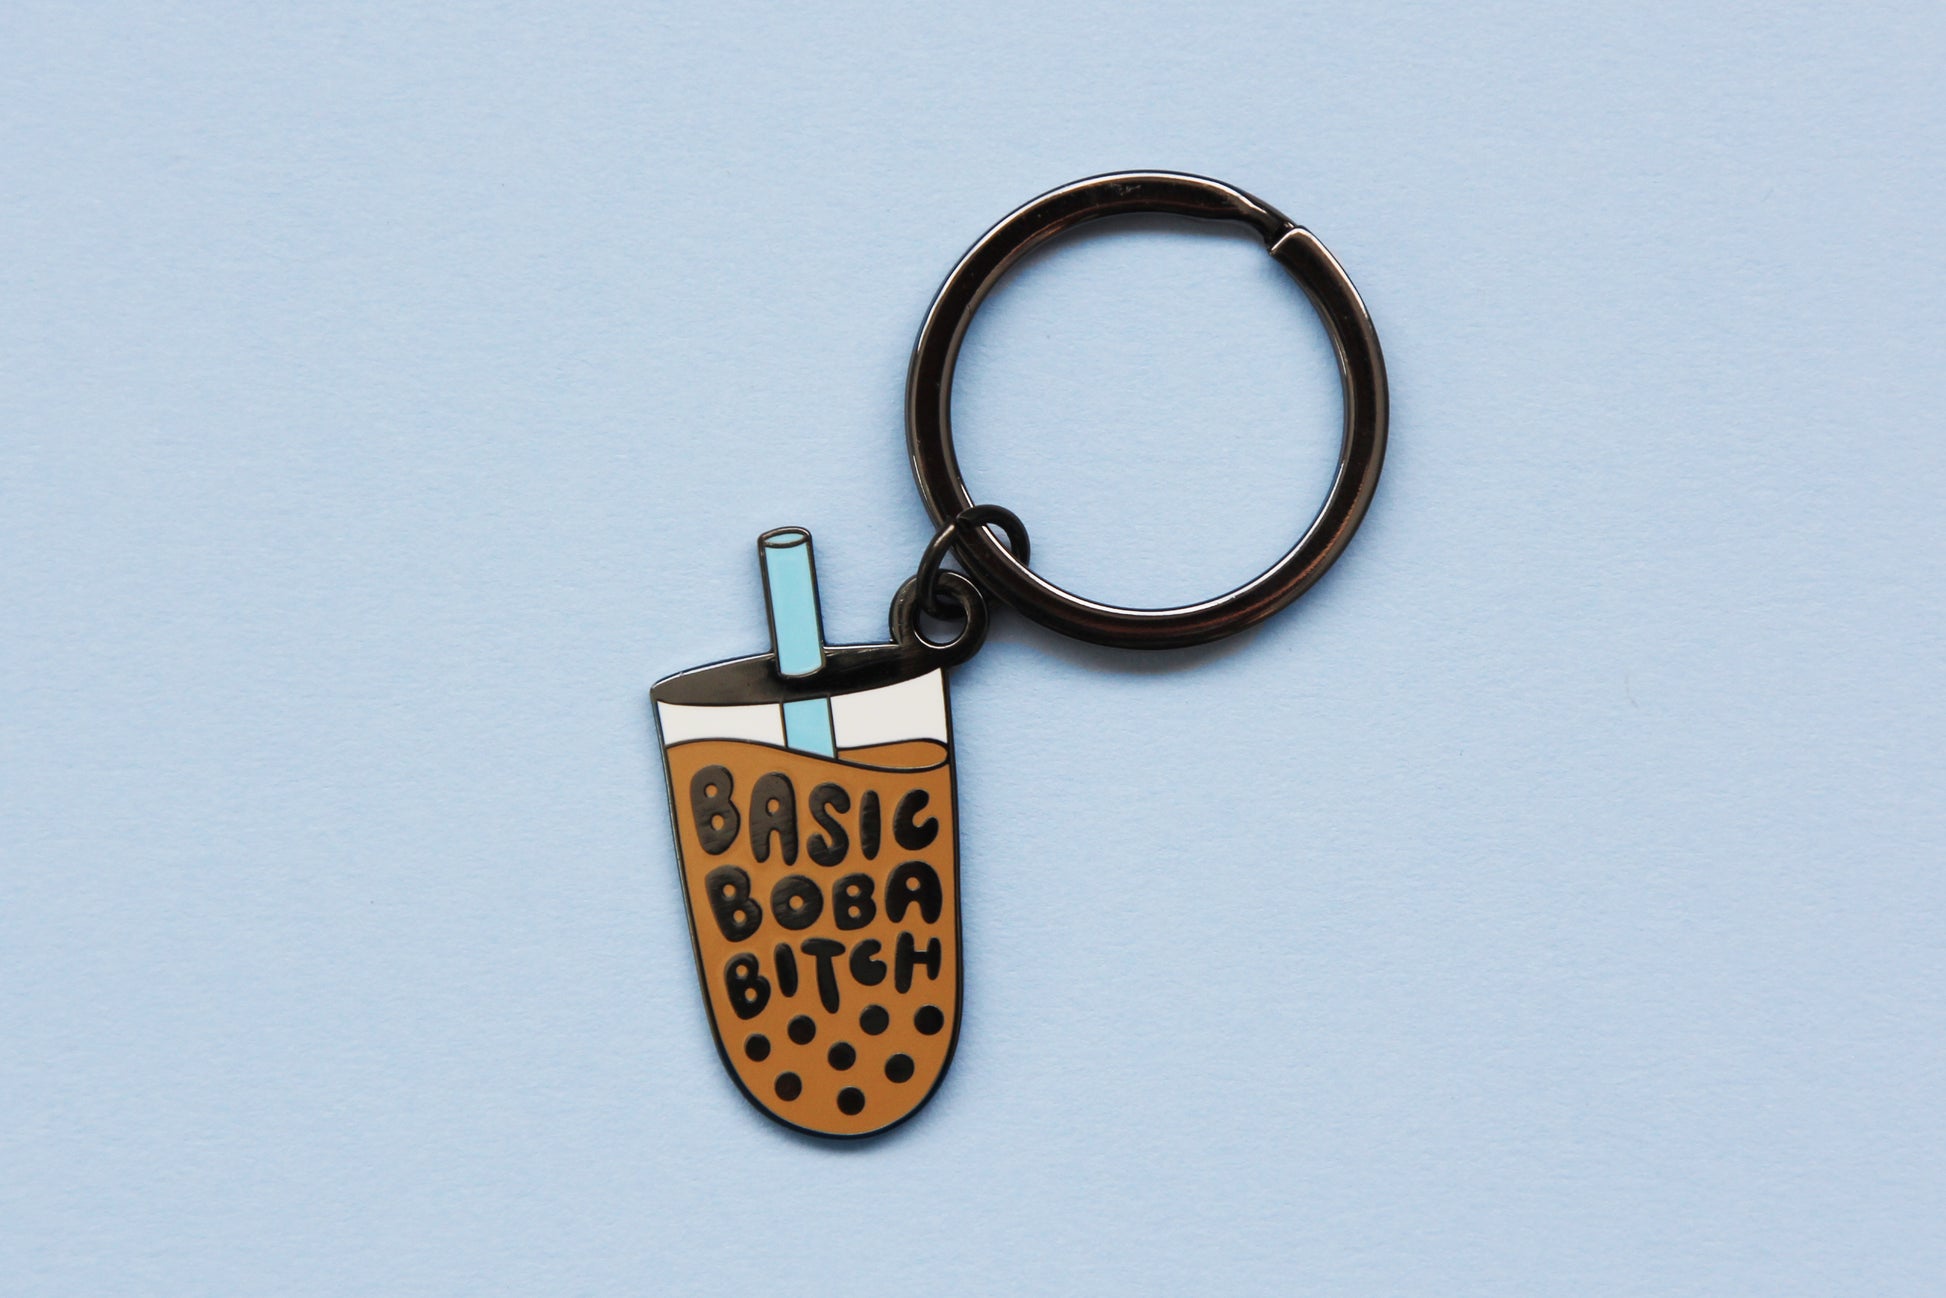 An enamel keychain showing a cup of boba that says "Basic Boba Bitch" with a blue straw over a blue background.